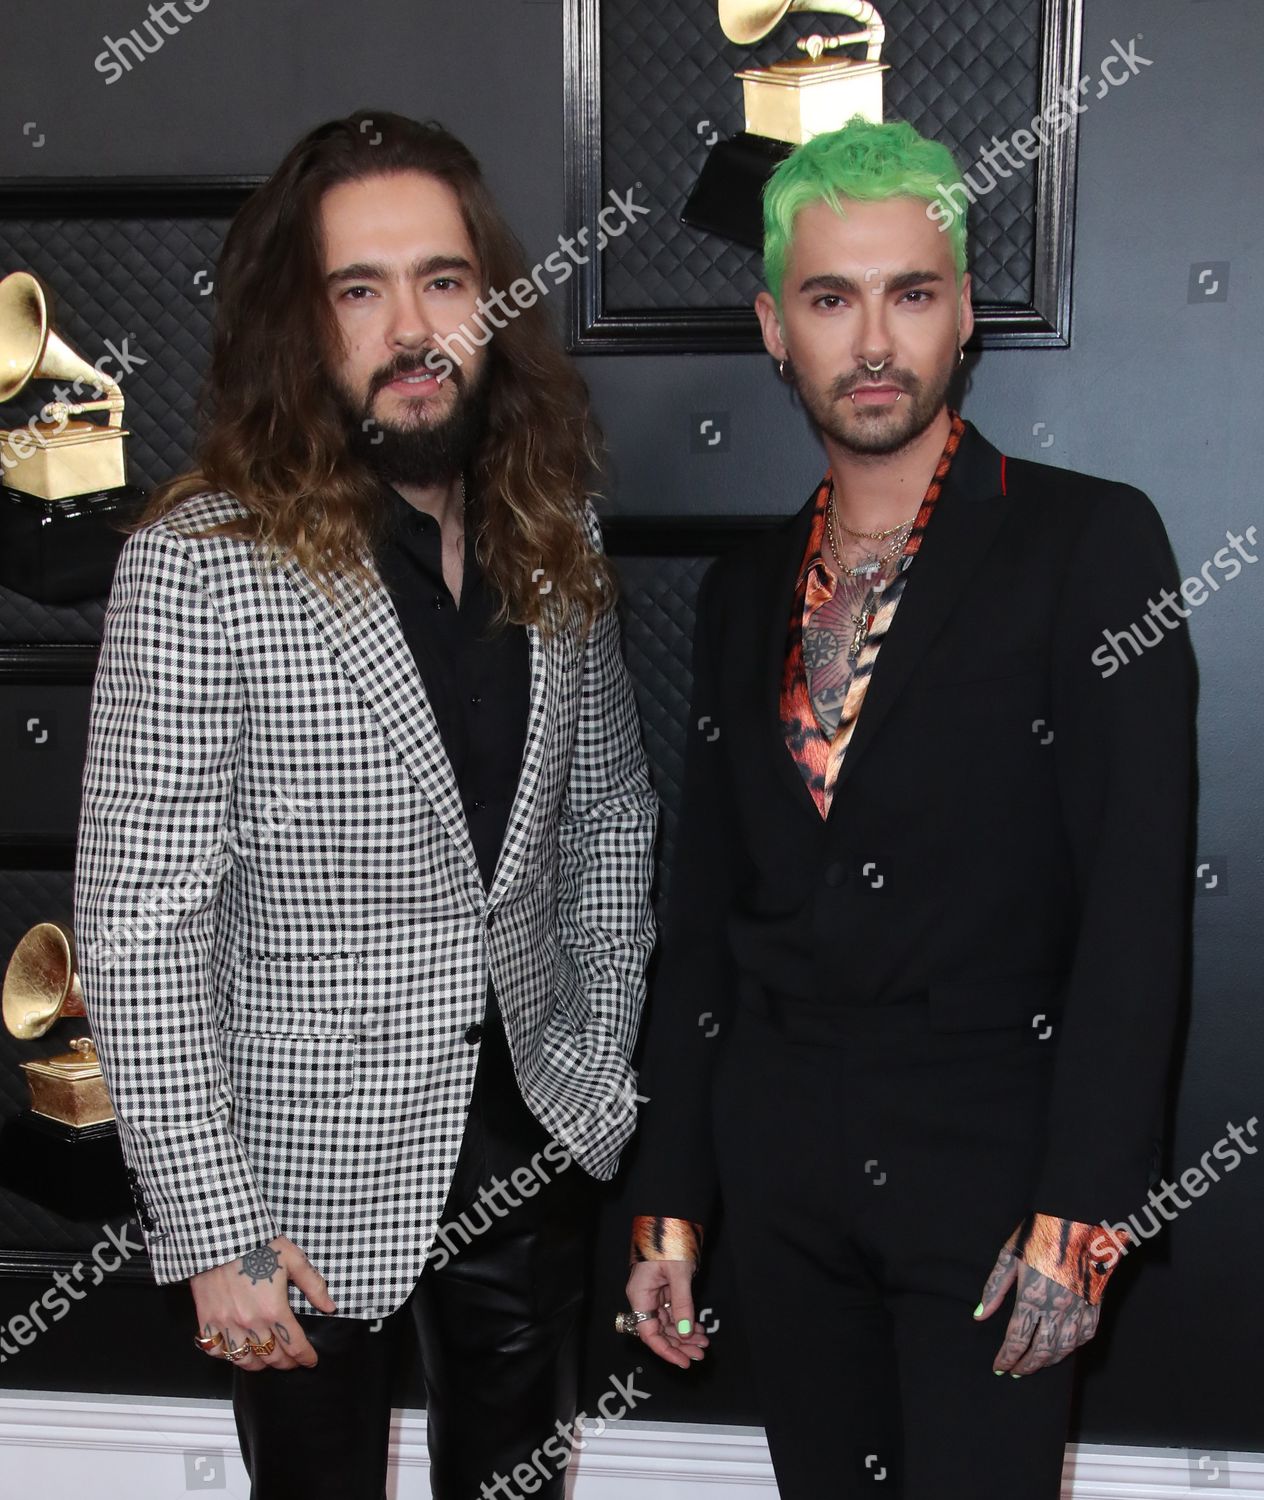 ¿Cuánto mide Bill Kaulitz? - Altura real: 1,80 - Real height 62nd-annual-grammy-awards-arrivals-los-angeles-usa-shutterstock-editorial-10543469eq